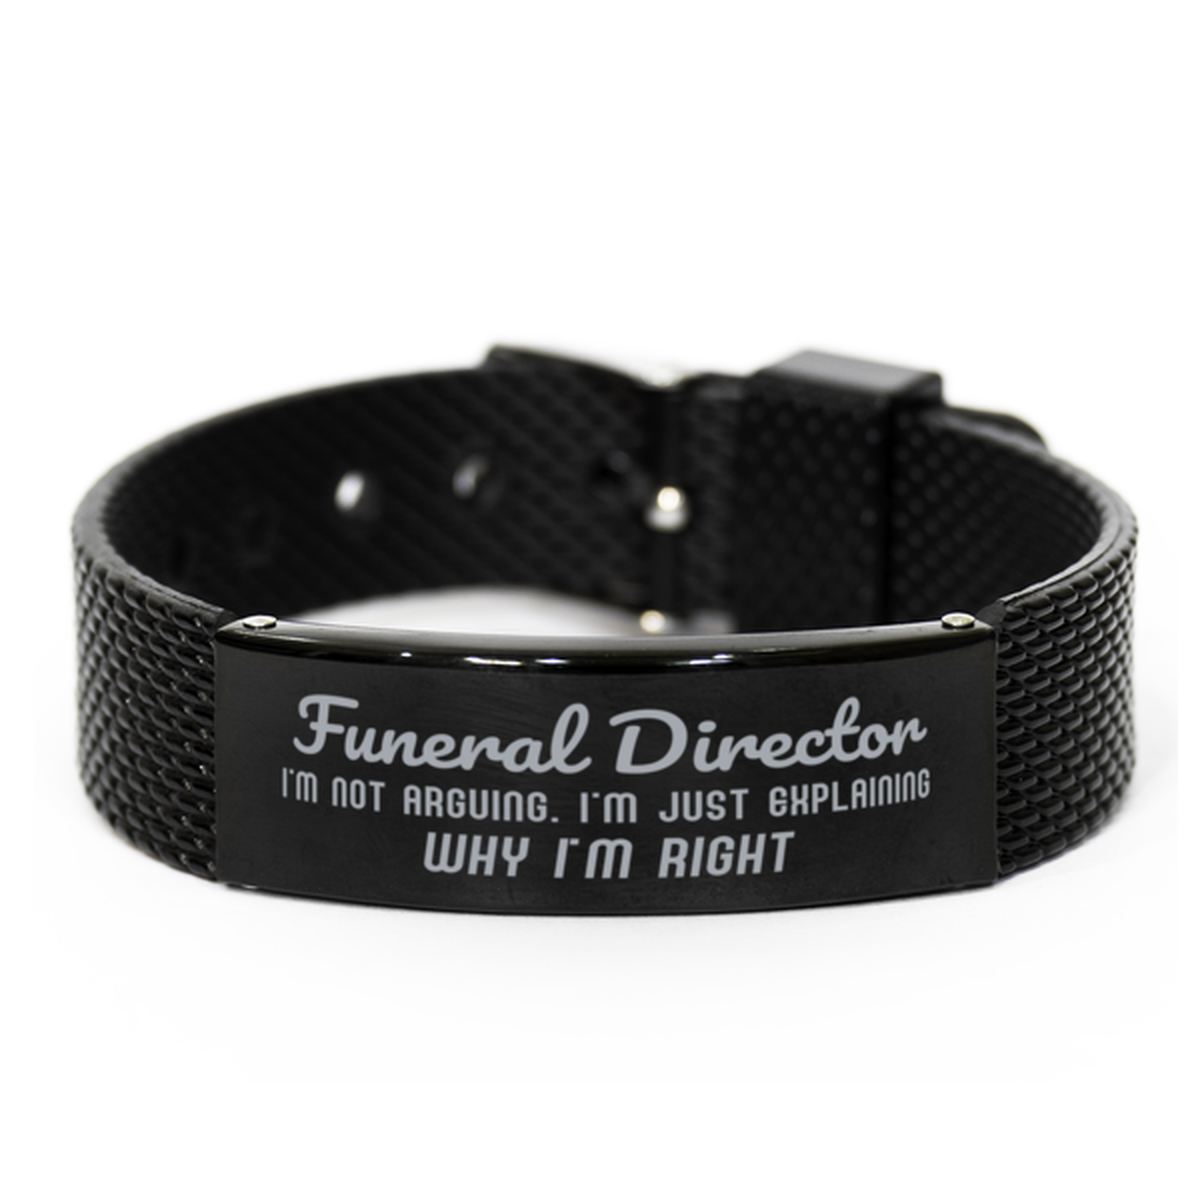 Funeral Director I'm not Arguing. I'm Just Explaining Why I'm RIGHT Black Shark Mesh Bracelet, Funny Saying Quote Funeral Director Gifts For Funeral Director Graduation Birthday Christmas Gifts for Men Women Coworker